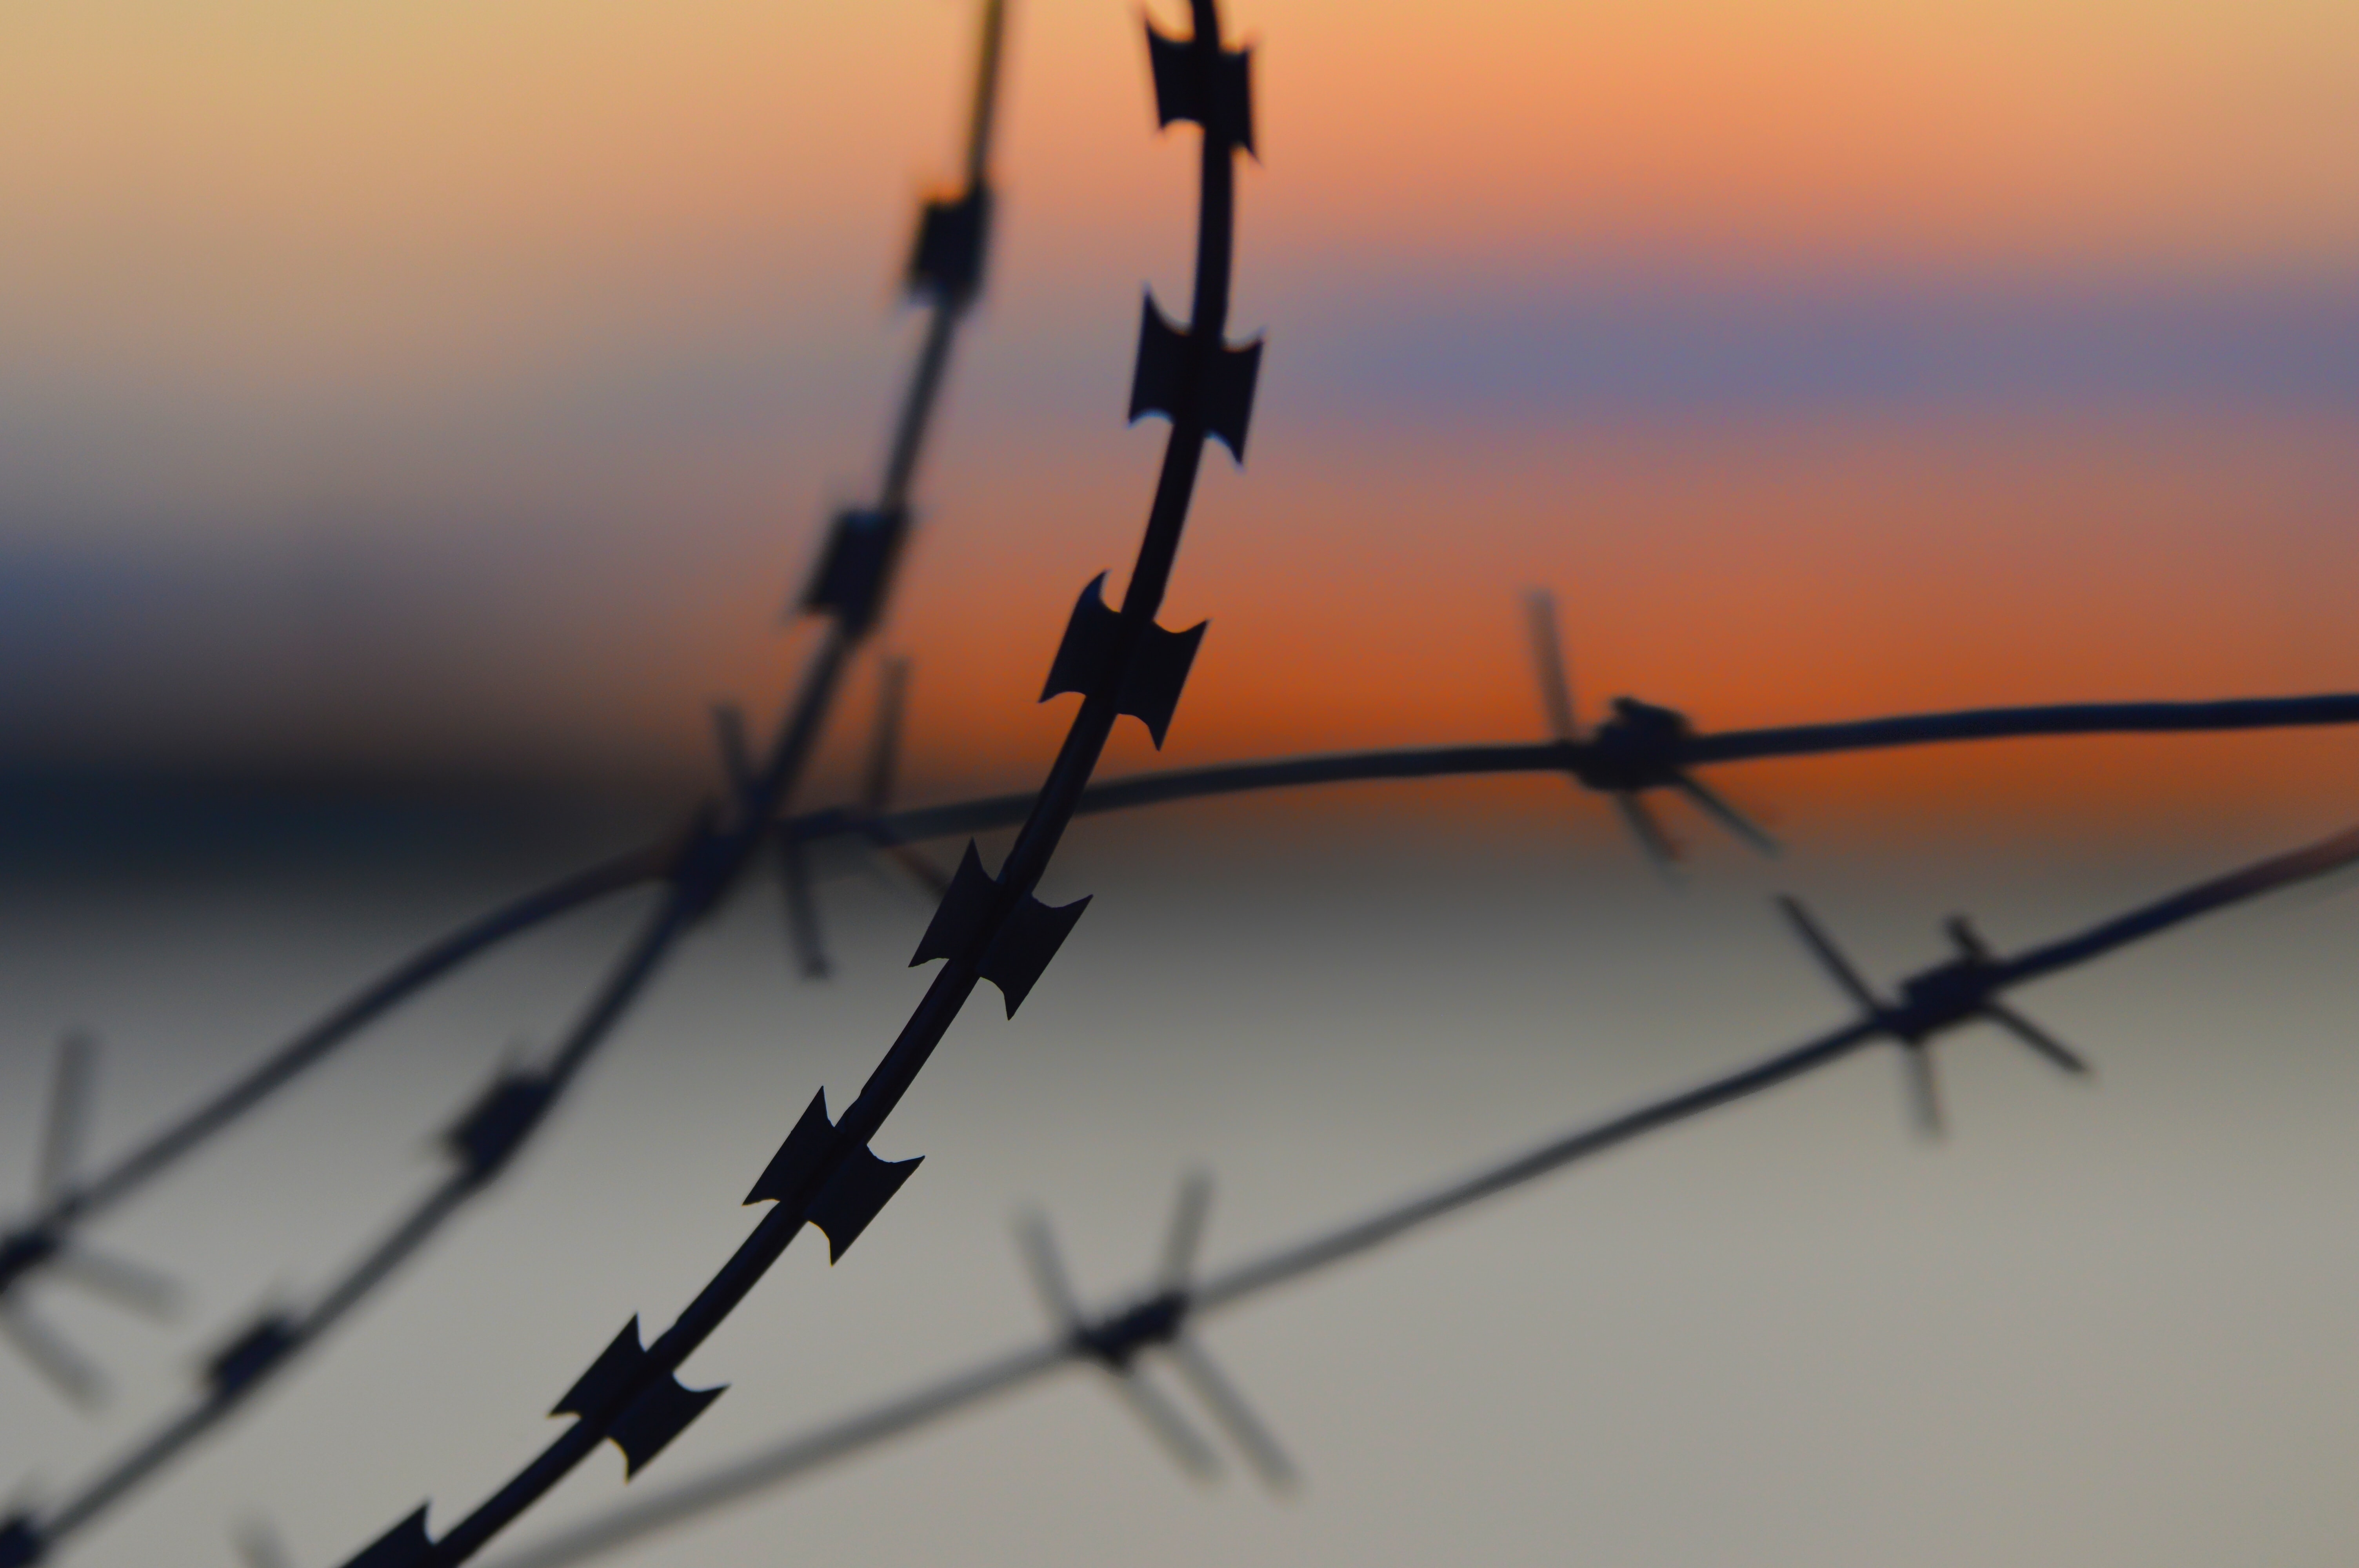 barb wire fence